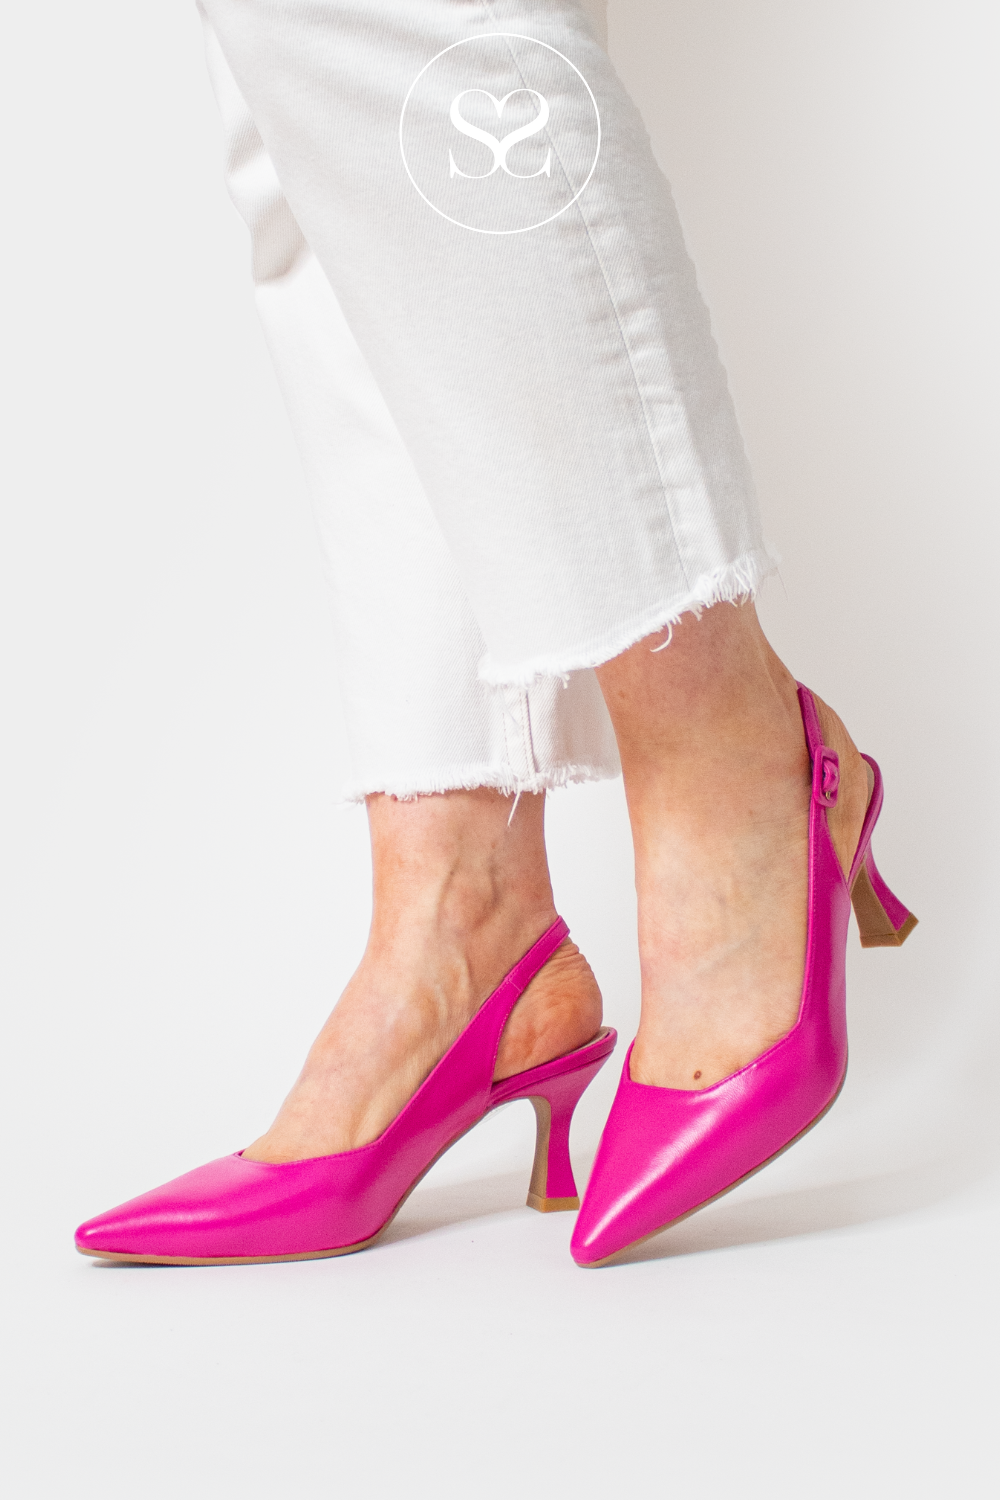 LODI JUCO PINK LEATHER FLARED HEEL SLINGBACK SHOES